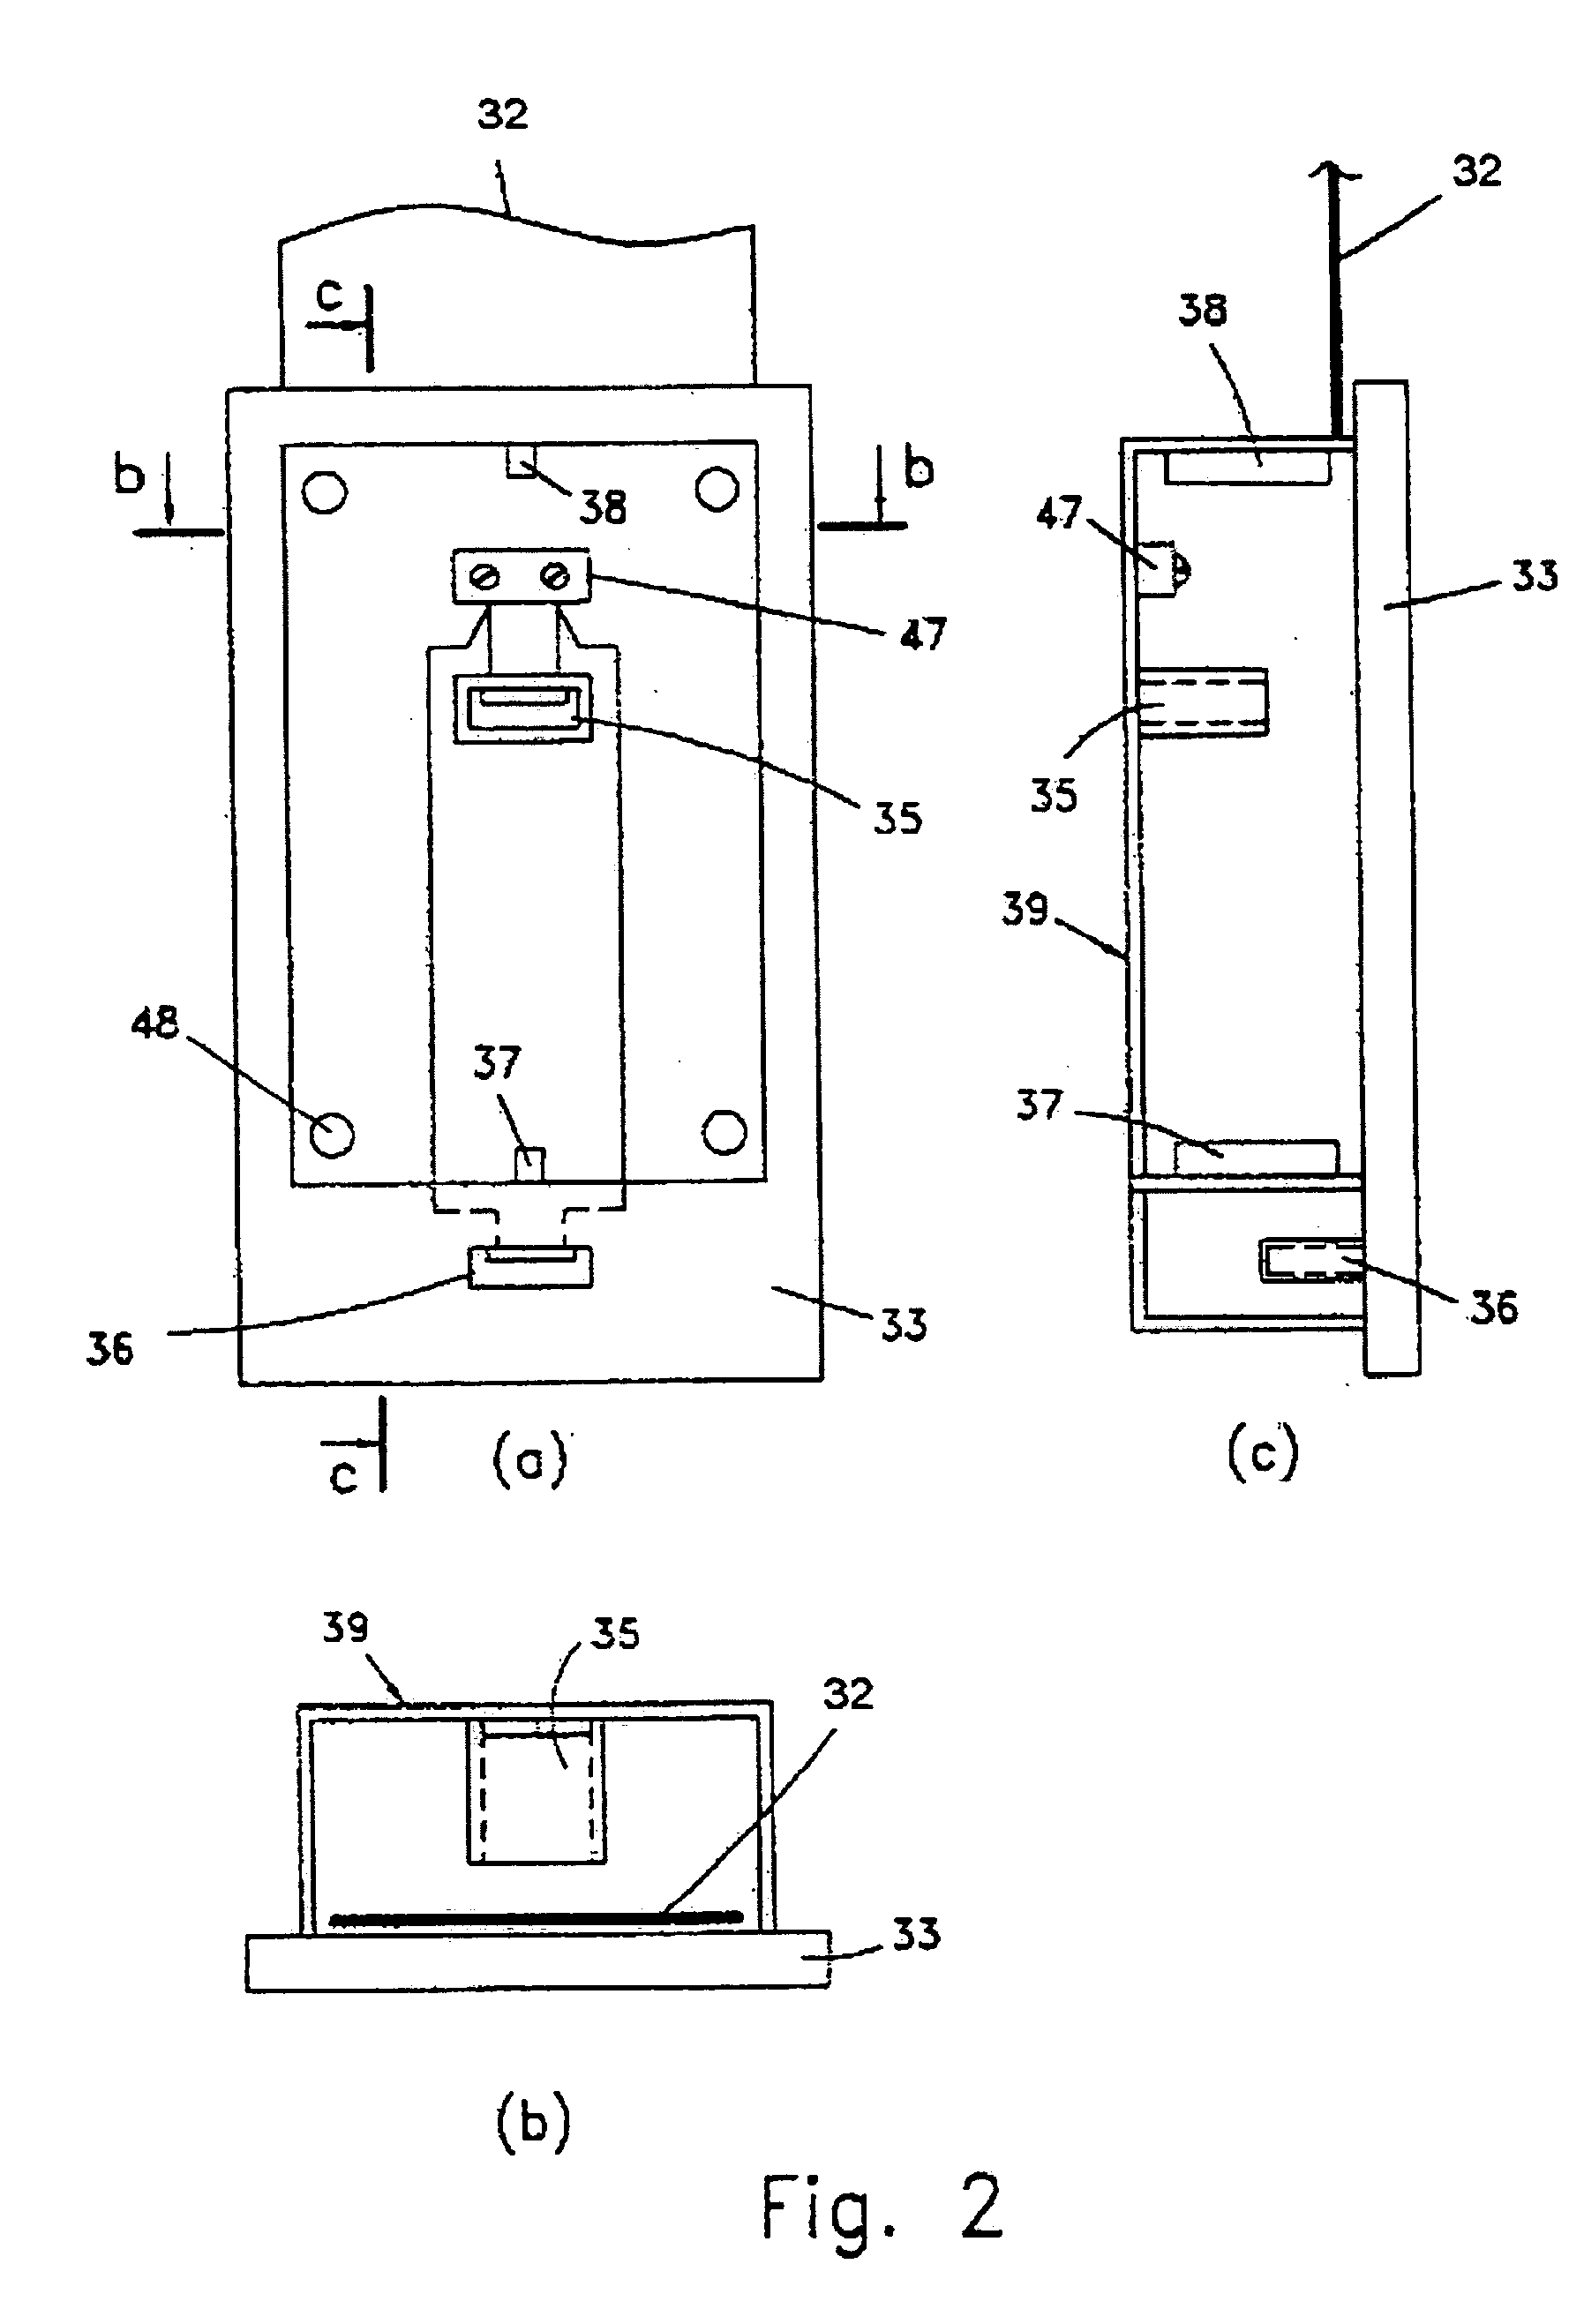 Apparatus for allowing handheld wireless devices to communicate voice and information over preexisting telephone lines